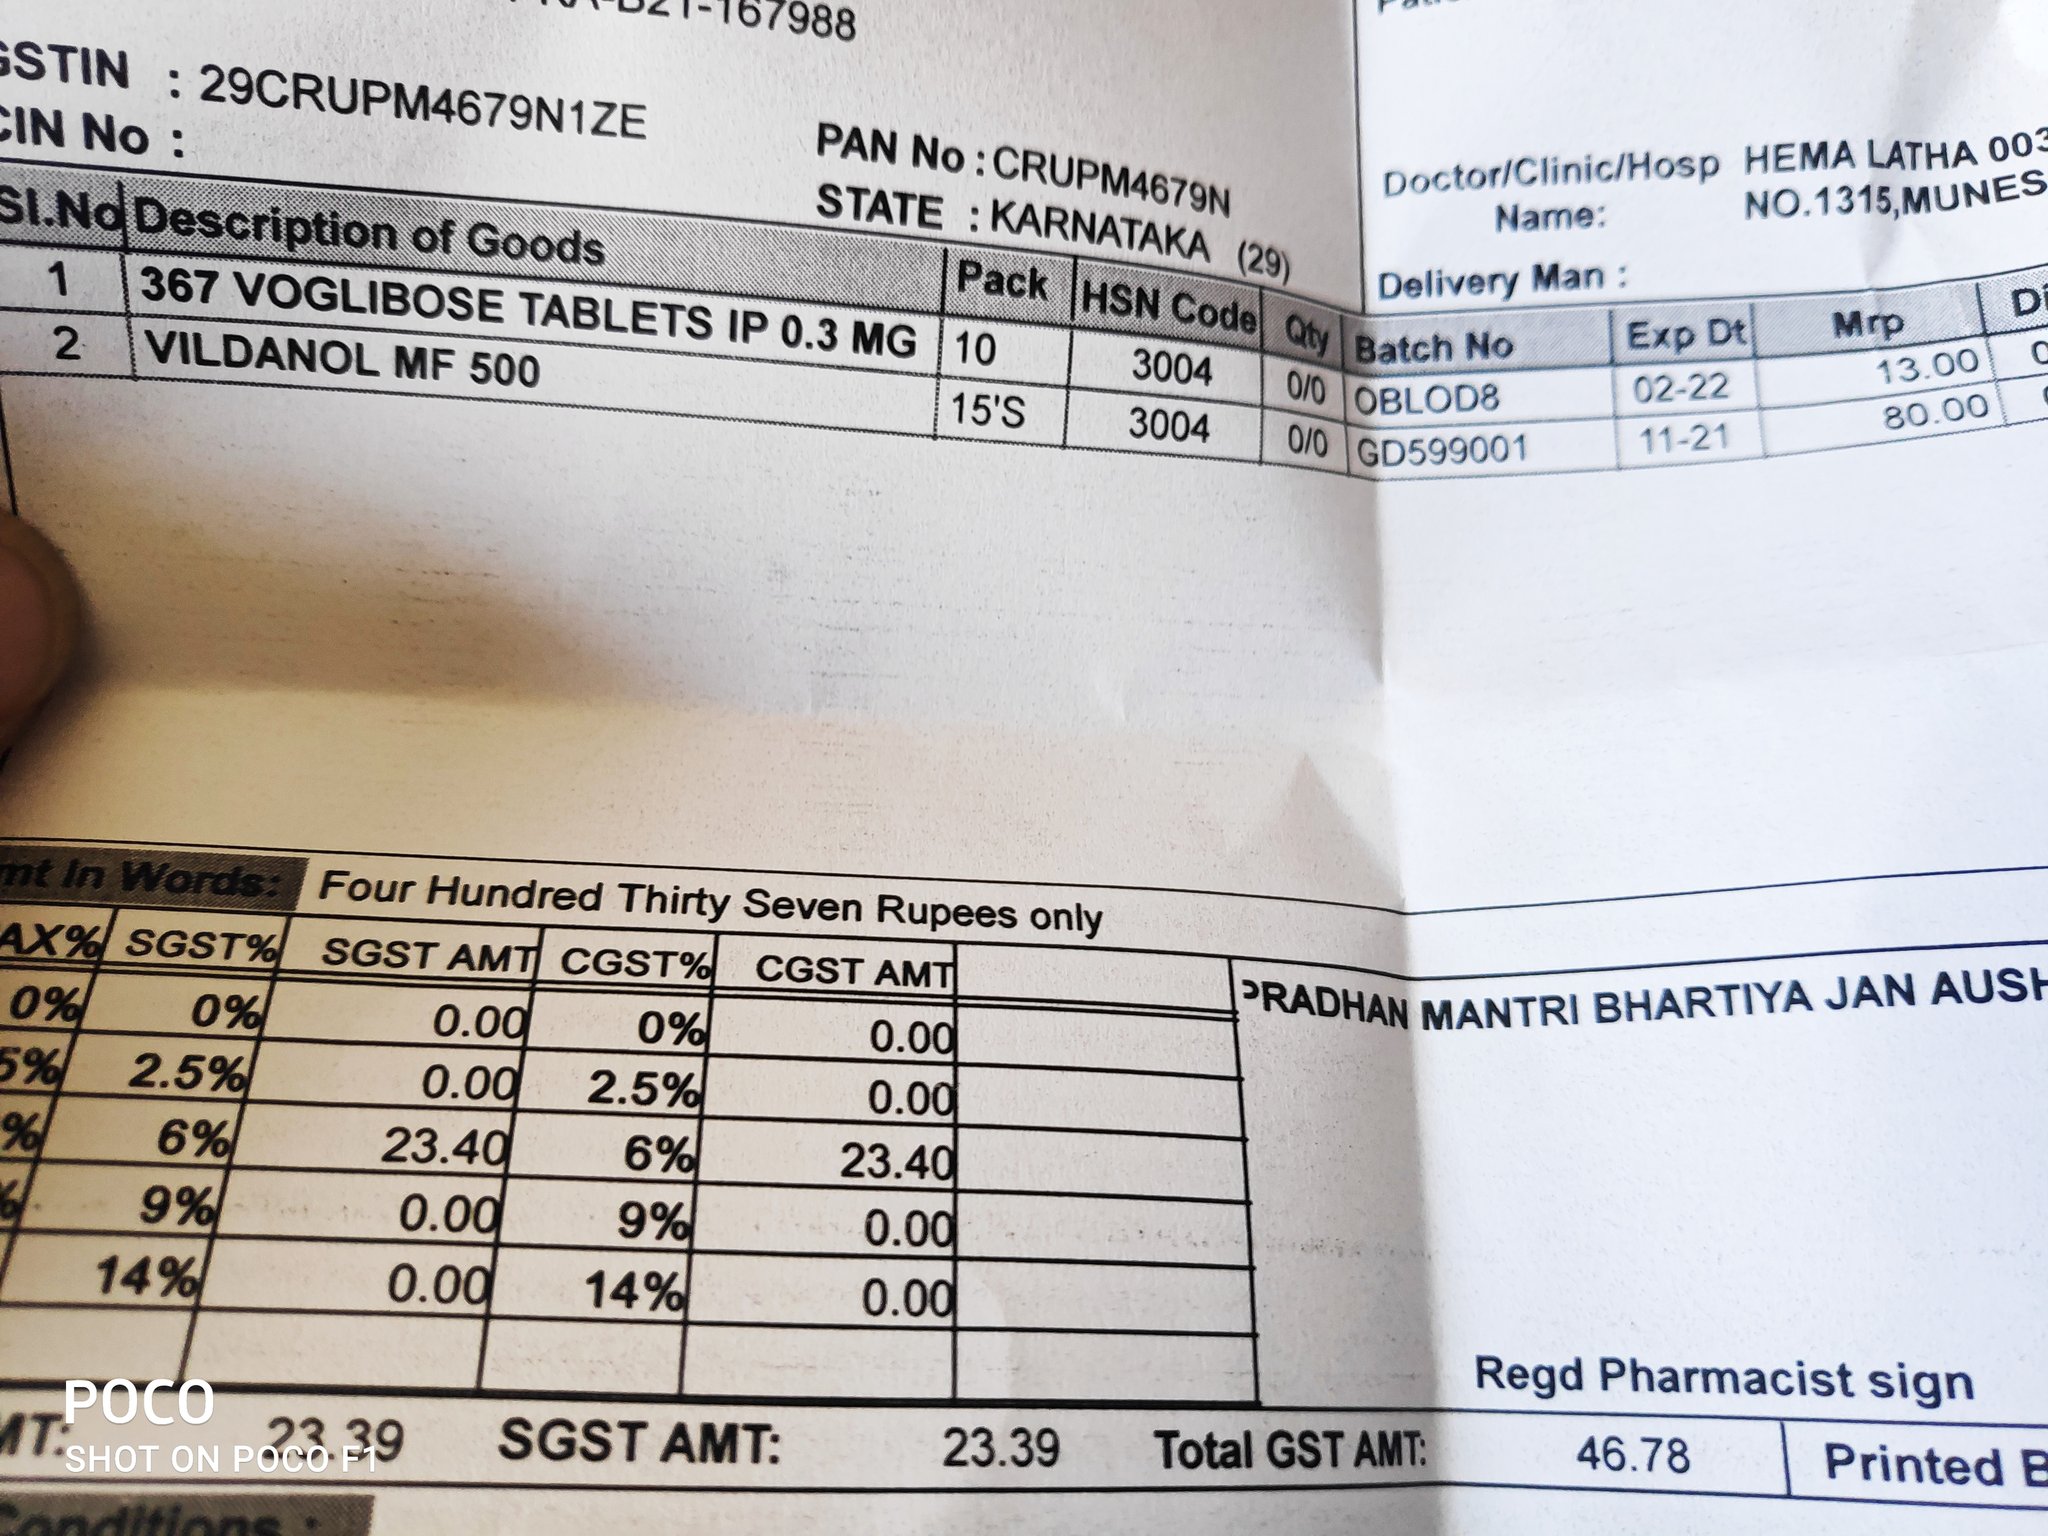 Swapnil Nayak ಸ ವಪ ನ ಲ ನ ಯಕ V Twitter Had Been To Pmbjpbppi At Chamarajapete Bengaluru With My Friend Hyuvakumar For Purchase Of Tablets A Strip Of 15tablets Mrp Was Rs 355 Got